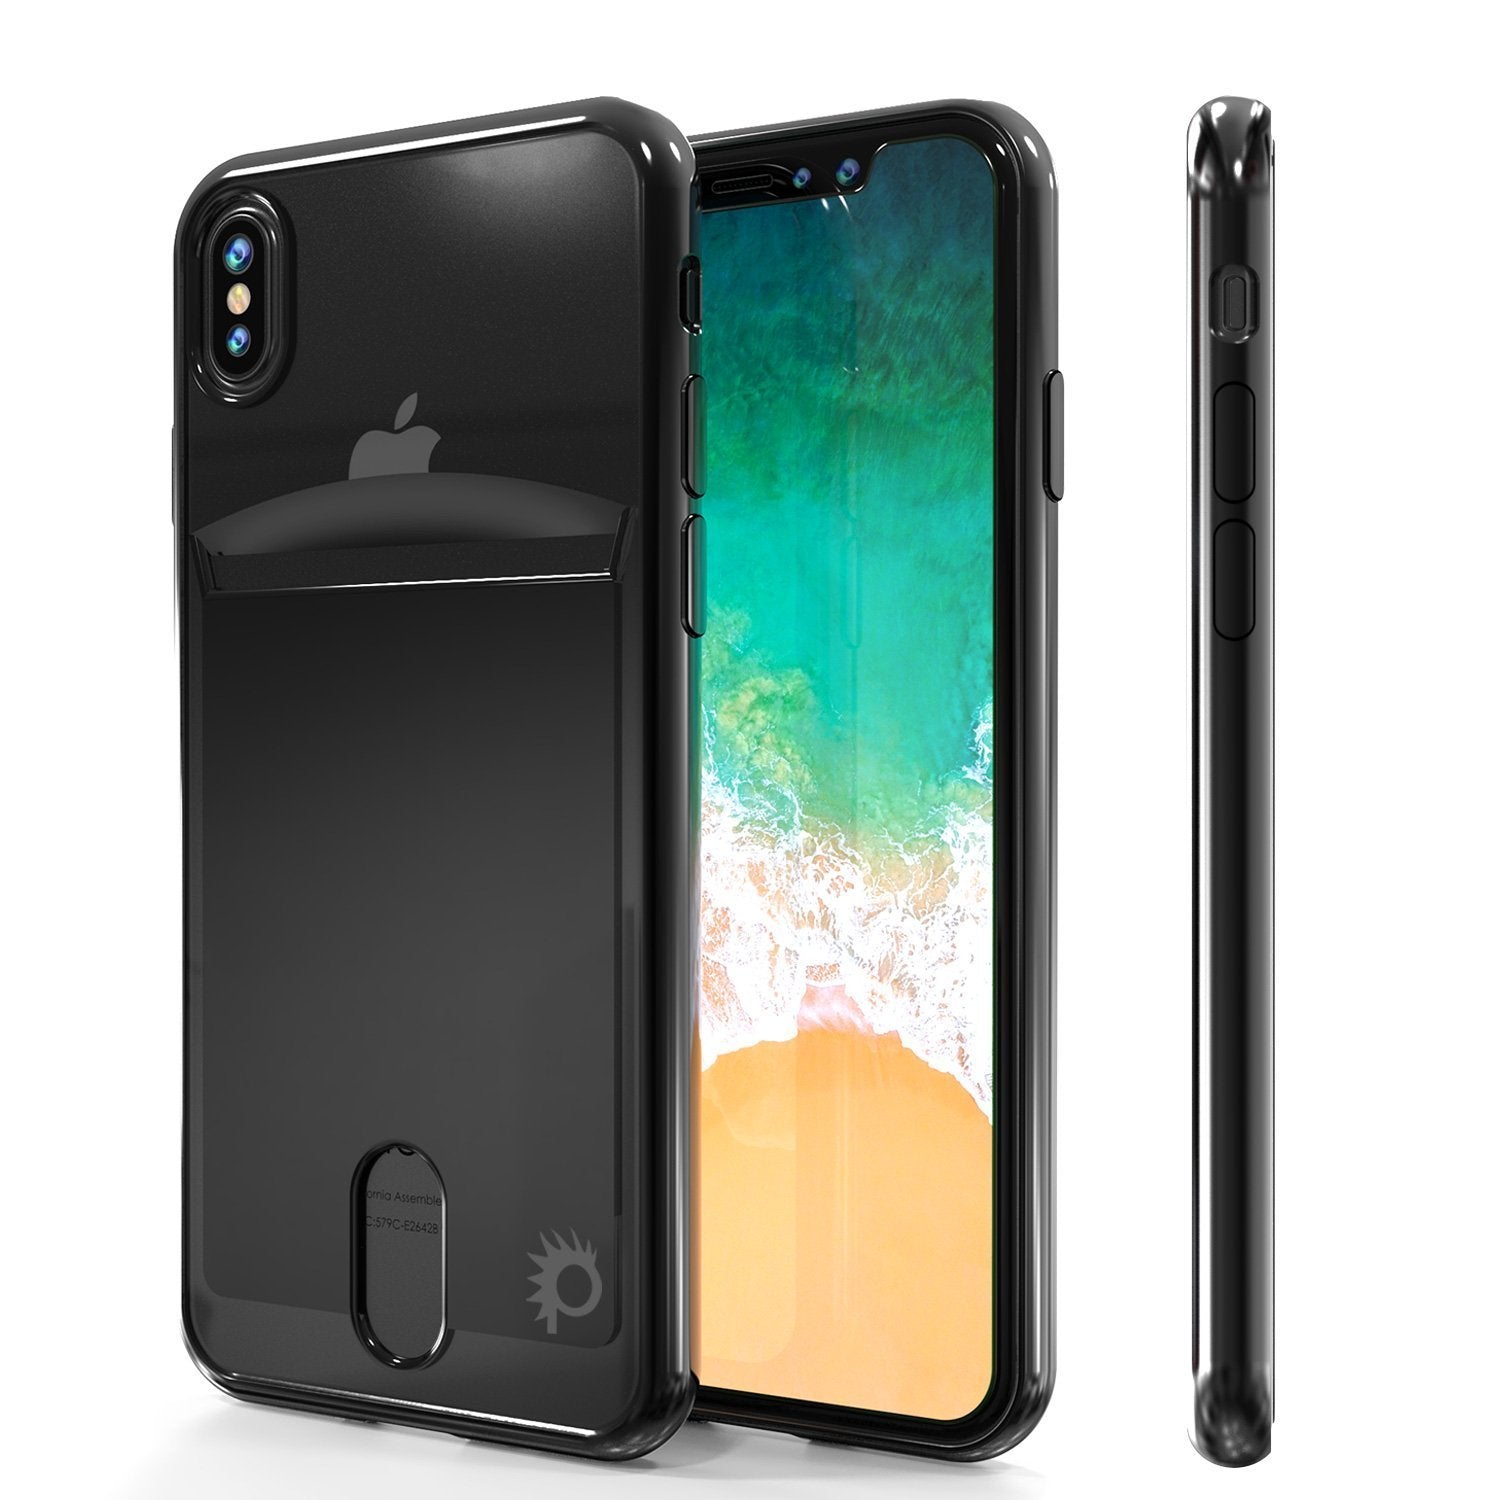 iPhone 8 Case, PUNKcase [LUCID Series] Slim Fit Protective Dual Layer Armor Cover W/ Scratch Resistant Screen Protector [BLACK]